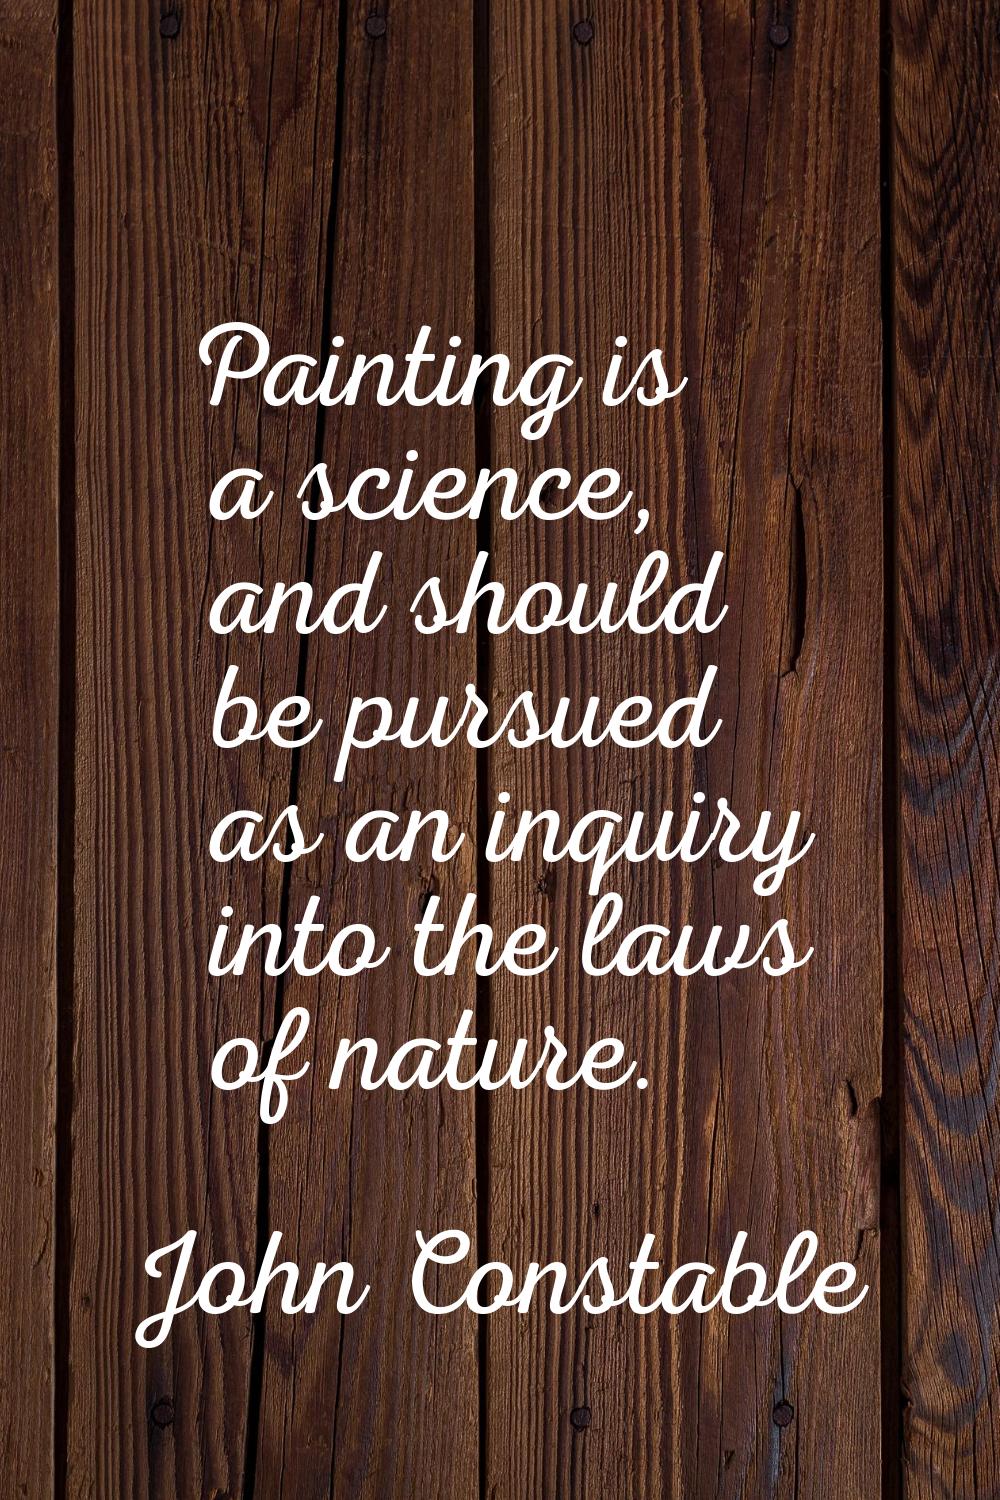 Painting is a science, and should be pursued as an inquiry into the laws of nature.